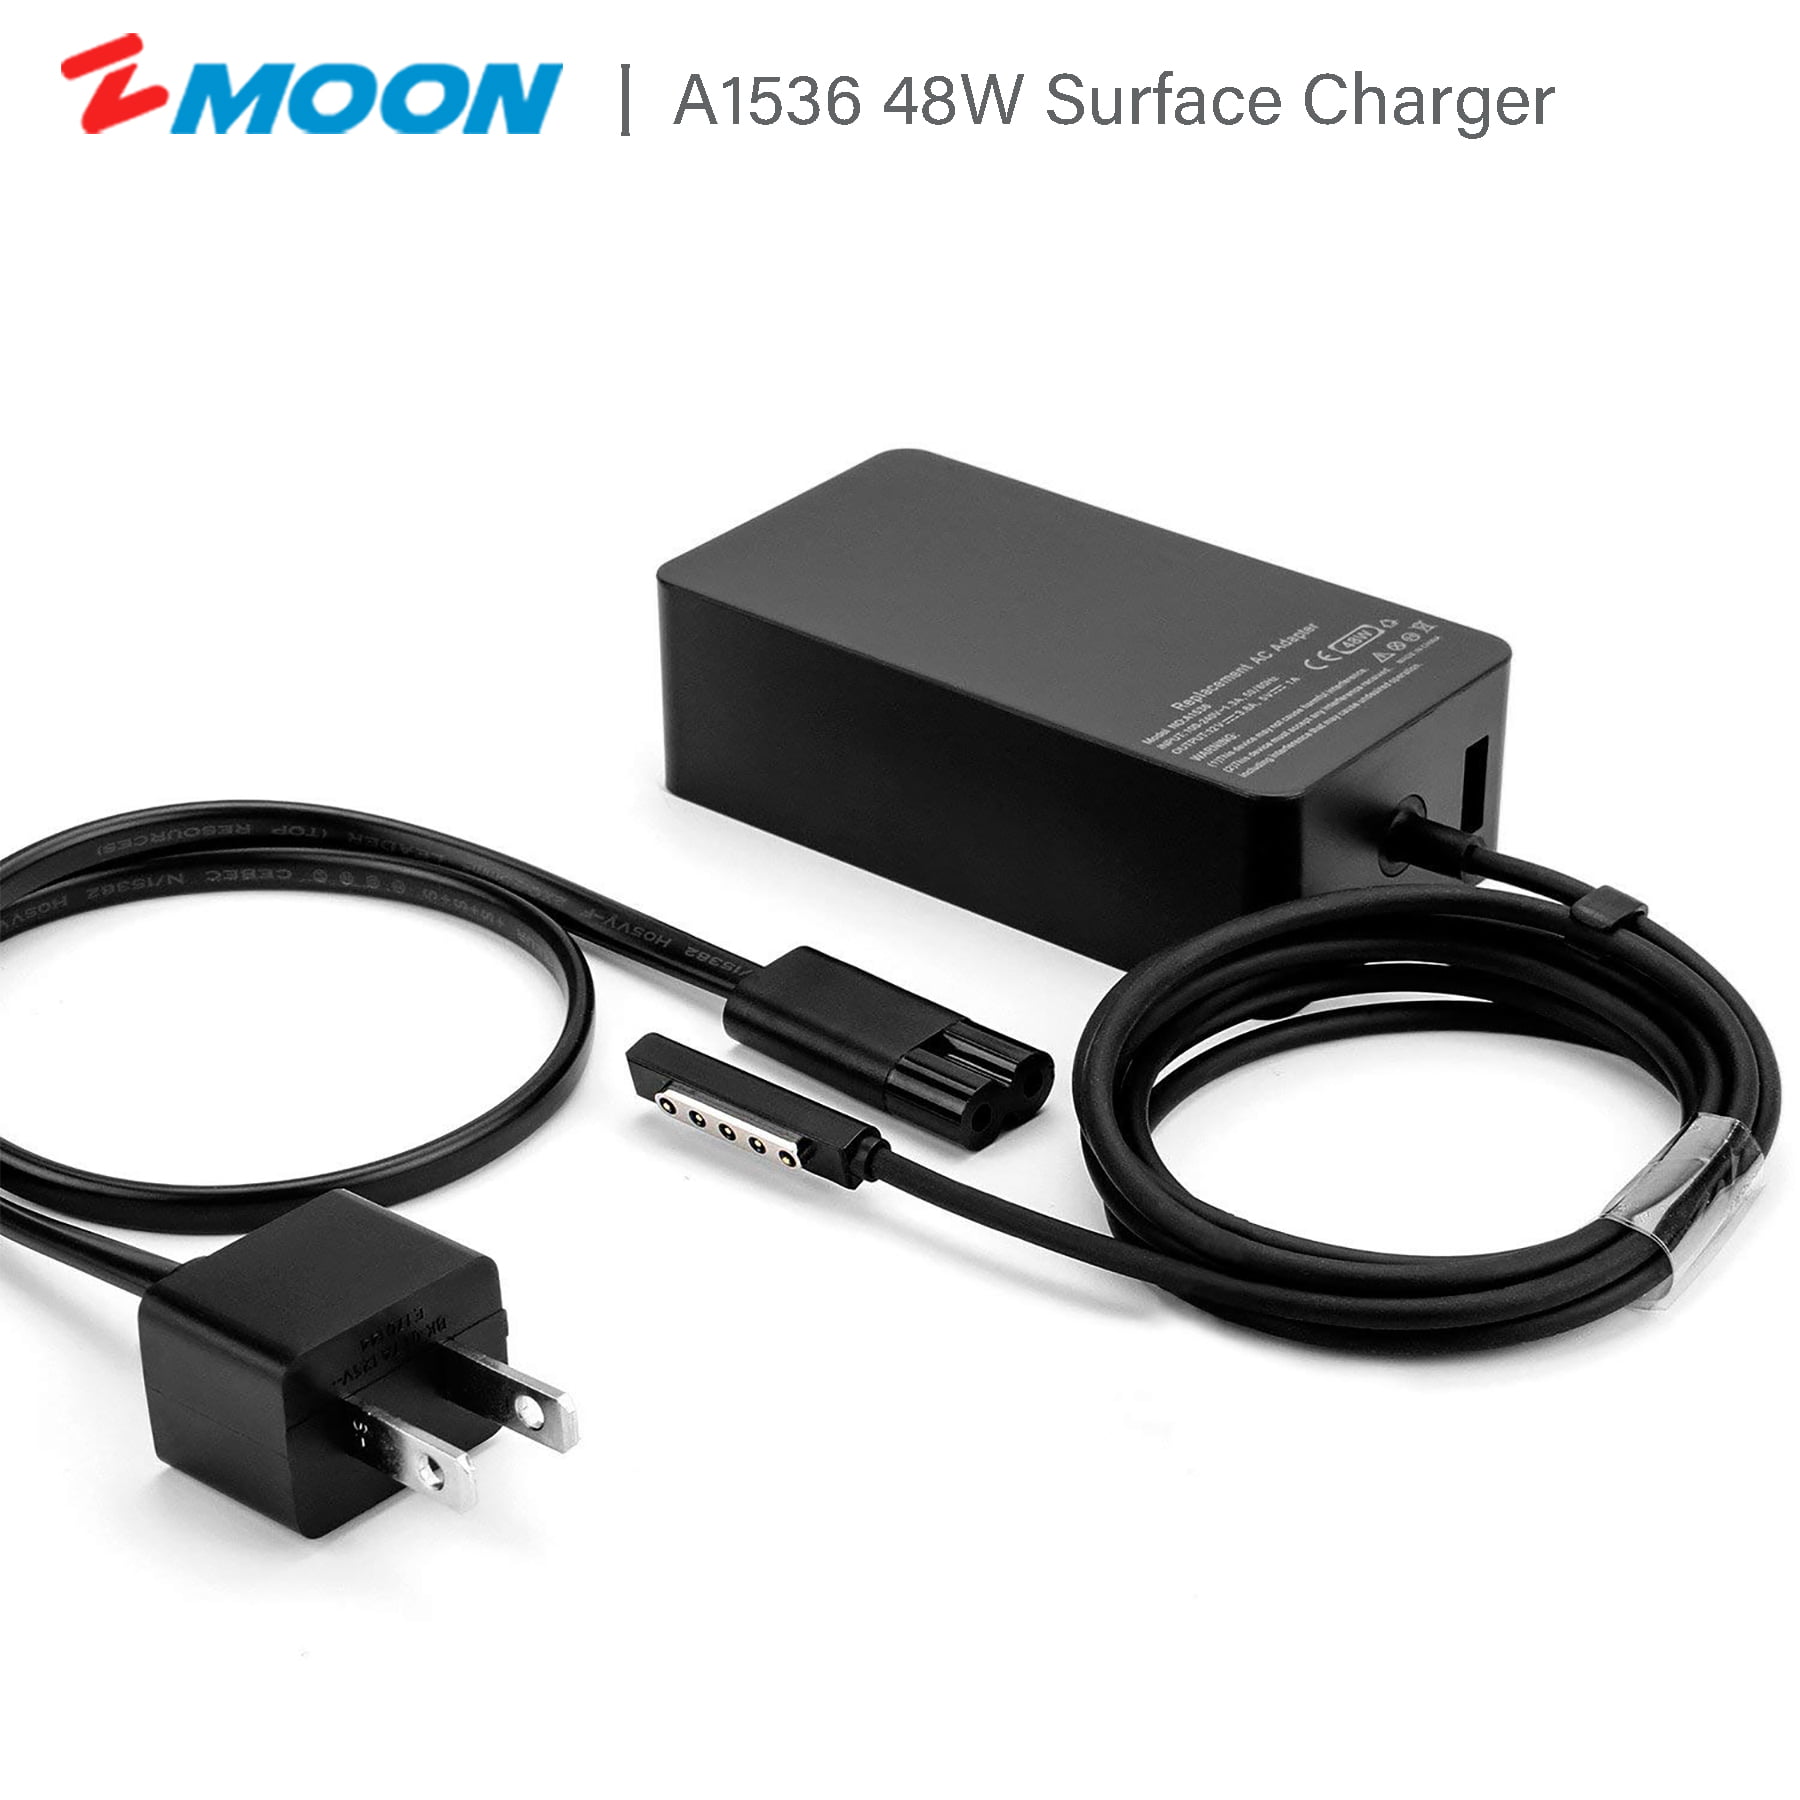 ZMoon 48W 12V 3.6A Replacement Power Supply Charger with USB port(5V 1A) Microsoft Surface Pro / Pro RT,fits Model 1516 1536 1512 PA-1240-06MX - Walmart.com